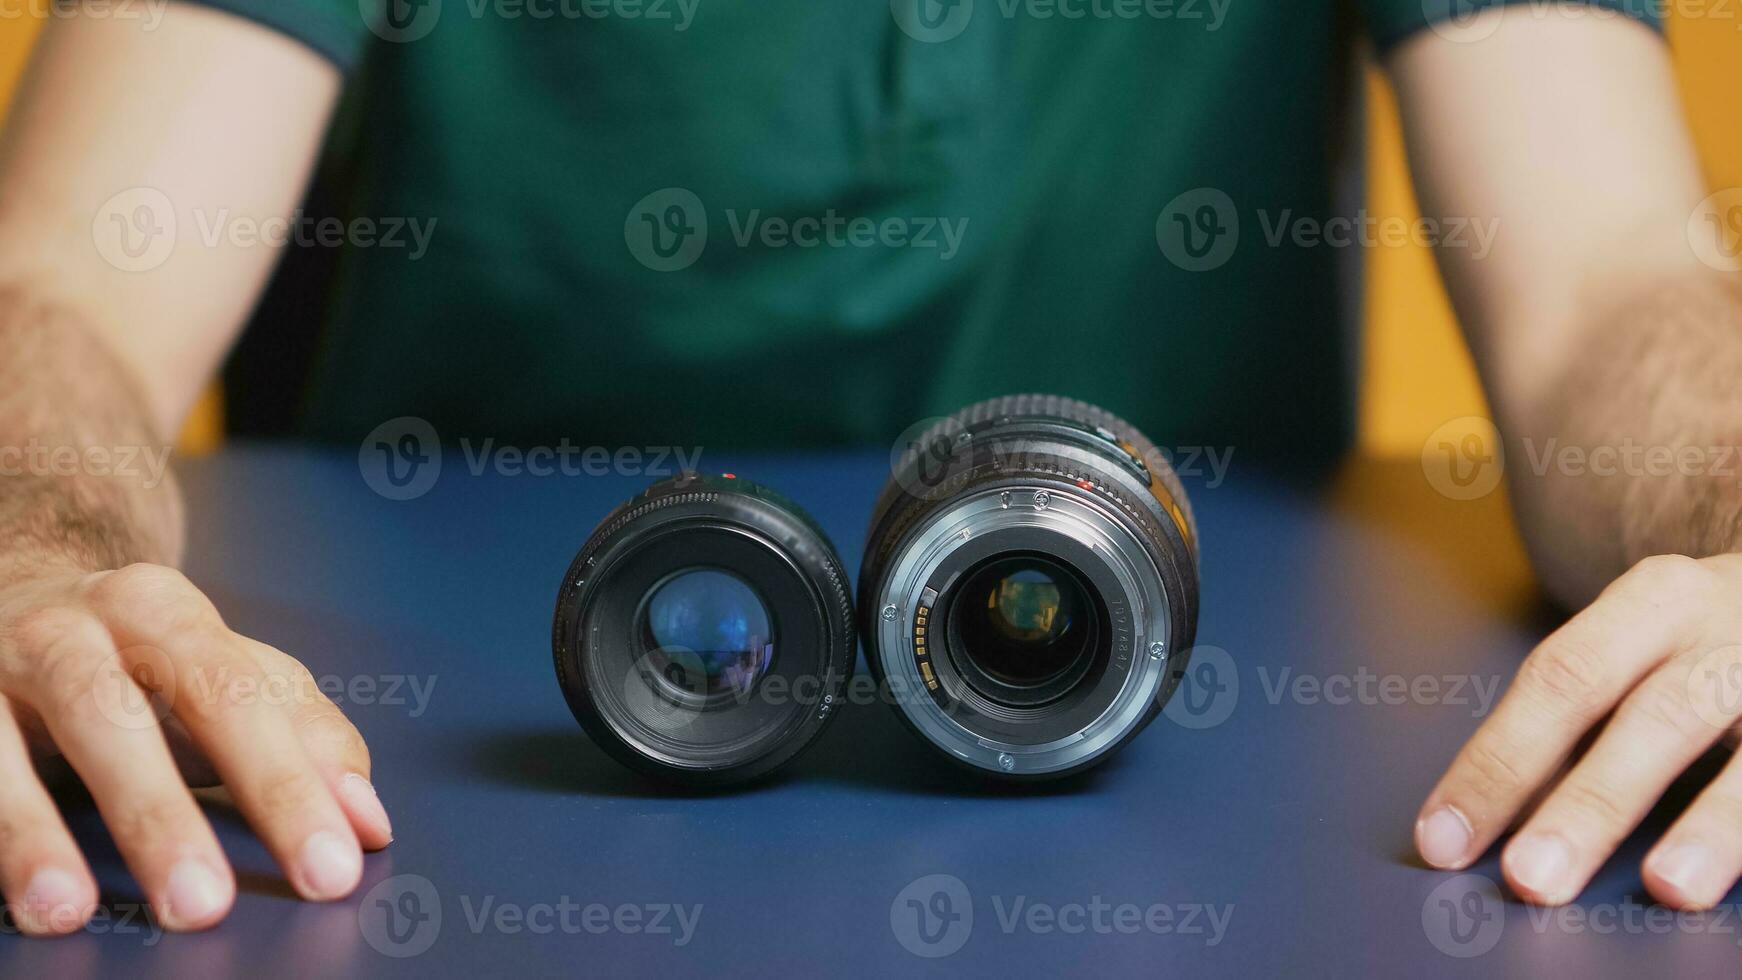 Close up of camera lenses while photographer records vlog. Camera lens technology digital recording social media influencer content creator, professional studio for podcast, vlogging and blogging photo